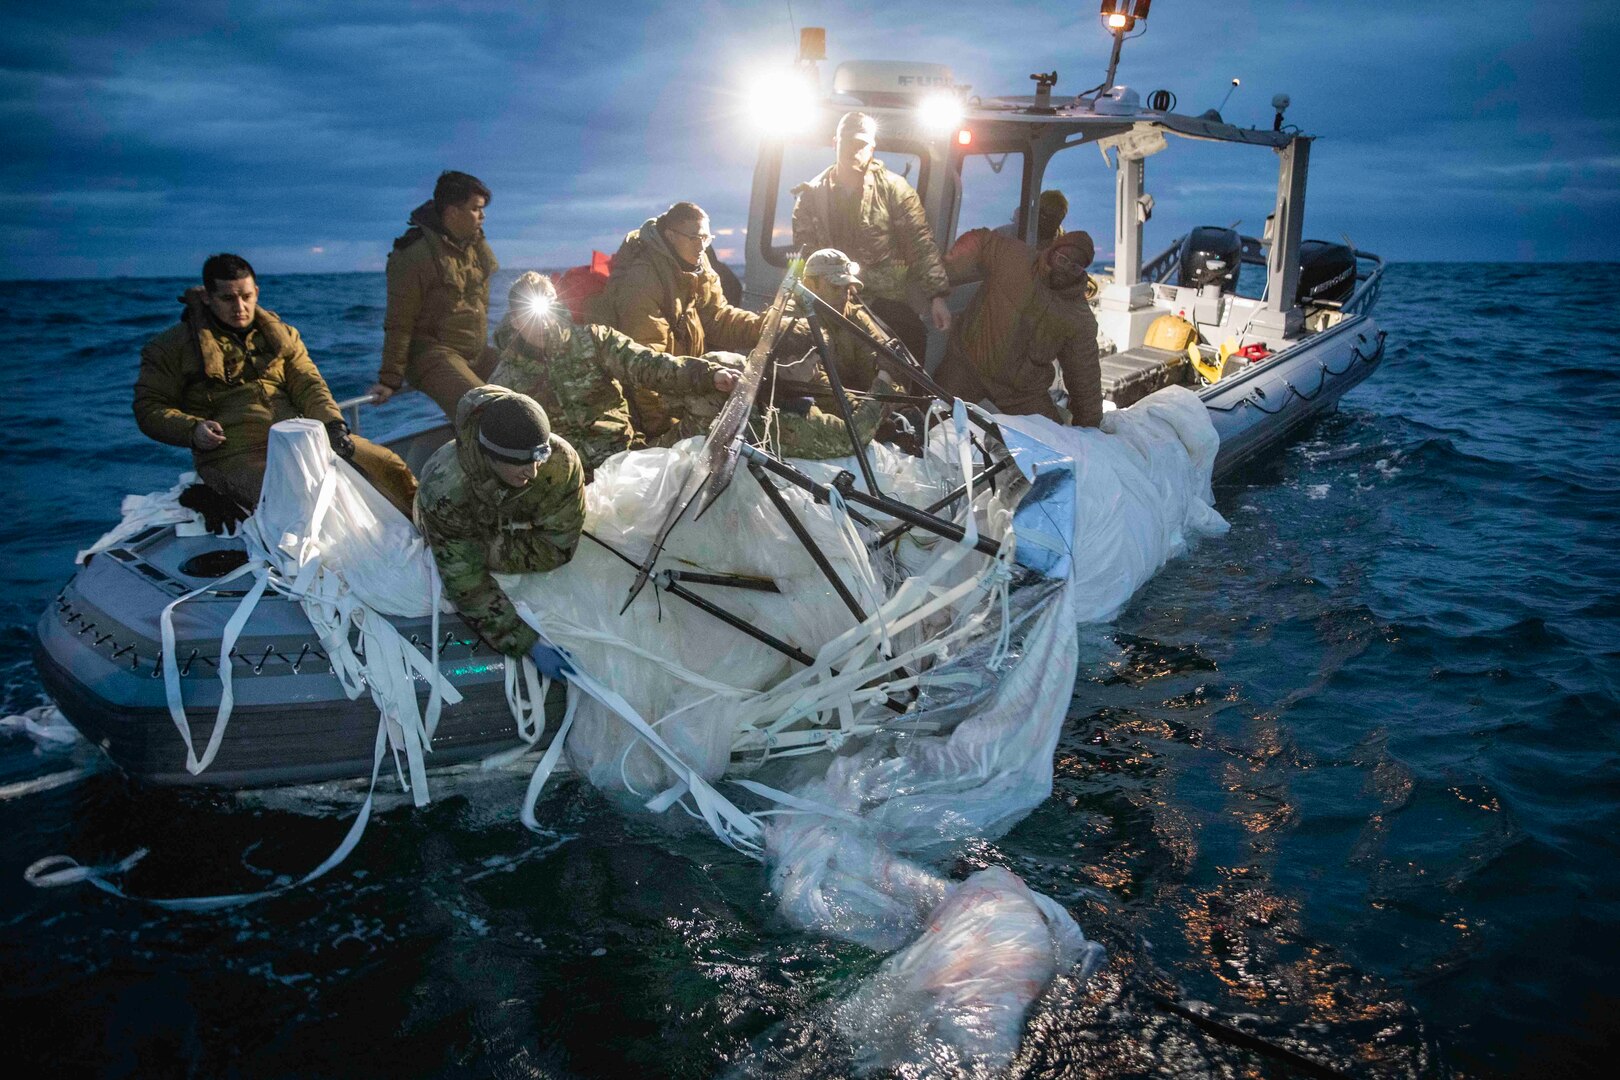 About eight service members in camouflage are in a small boat pulling in a deflated plastic balloon at night.